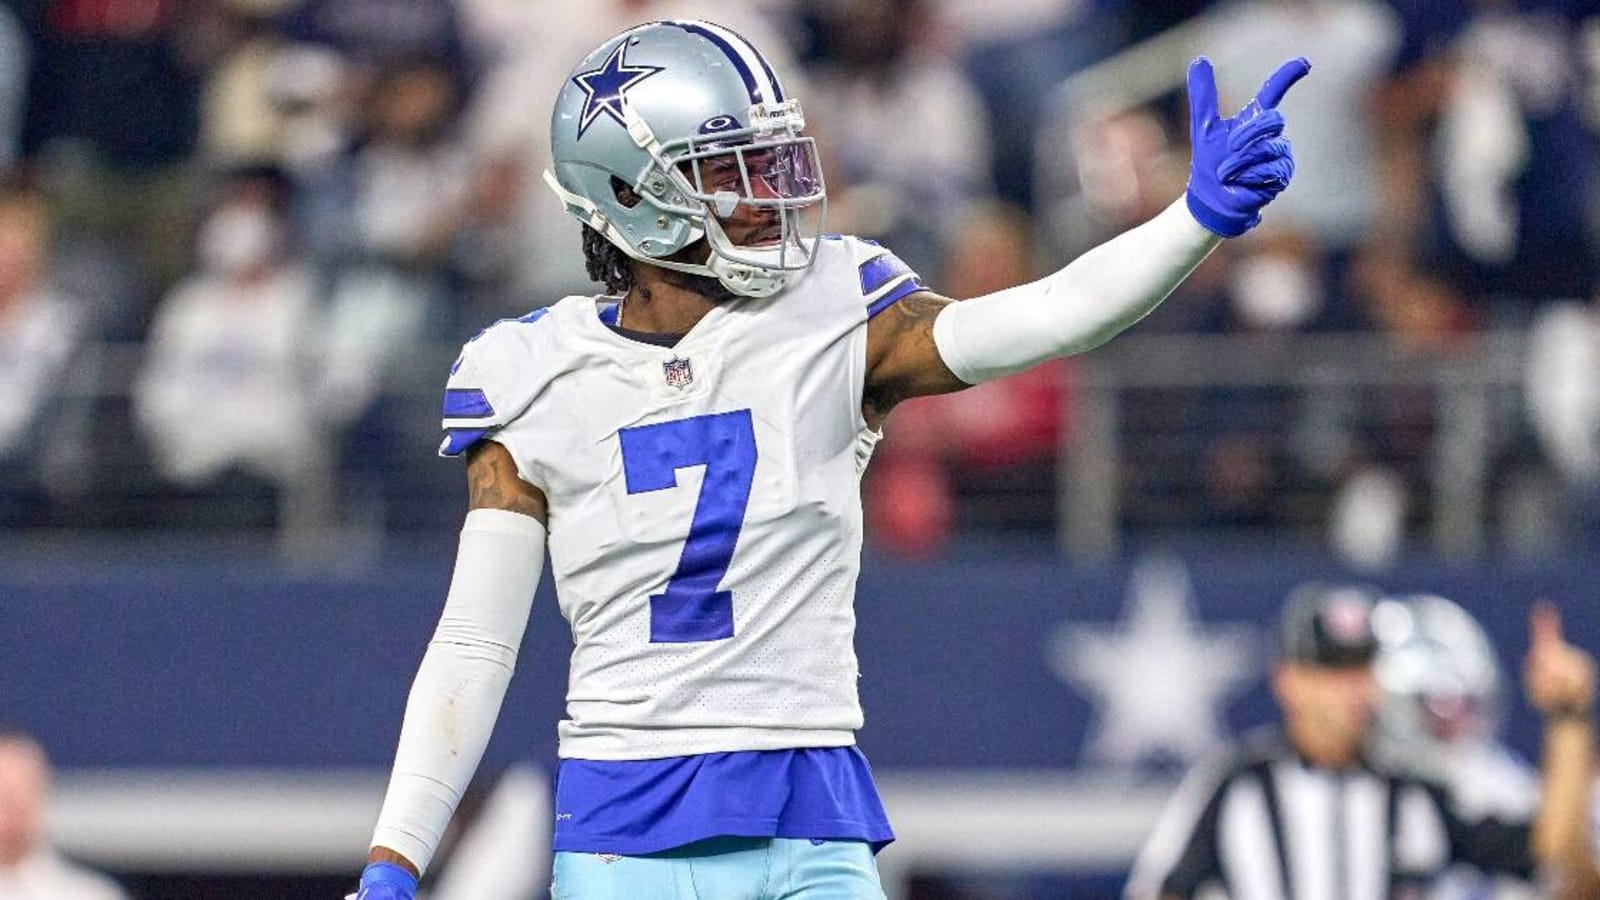 Former Cowboy Dez Bryant reveals what he’s told Trevon Diggs regarding contract extension discussions